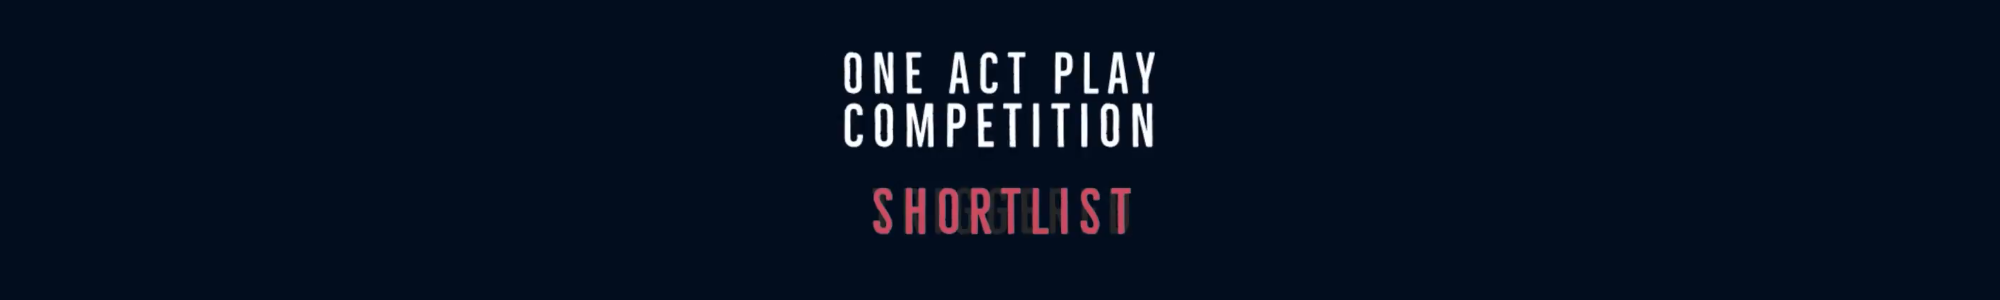 One act play shortlist